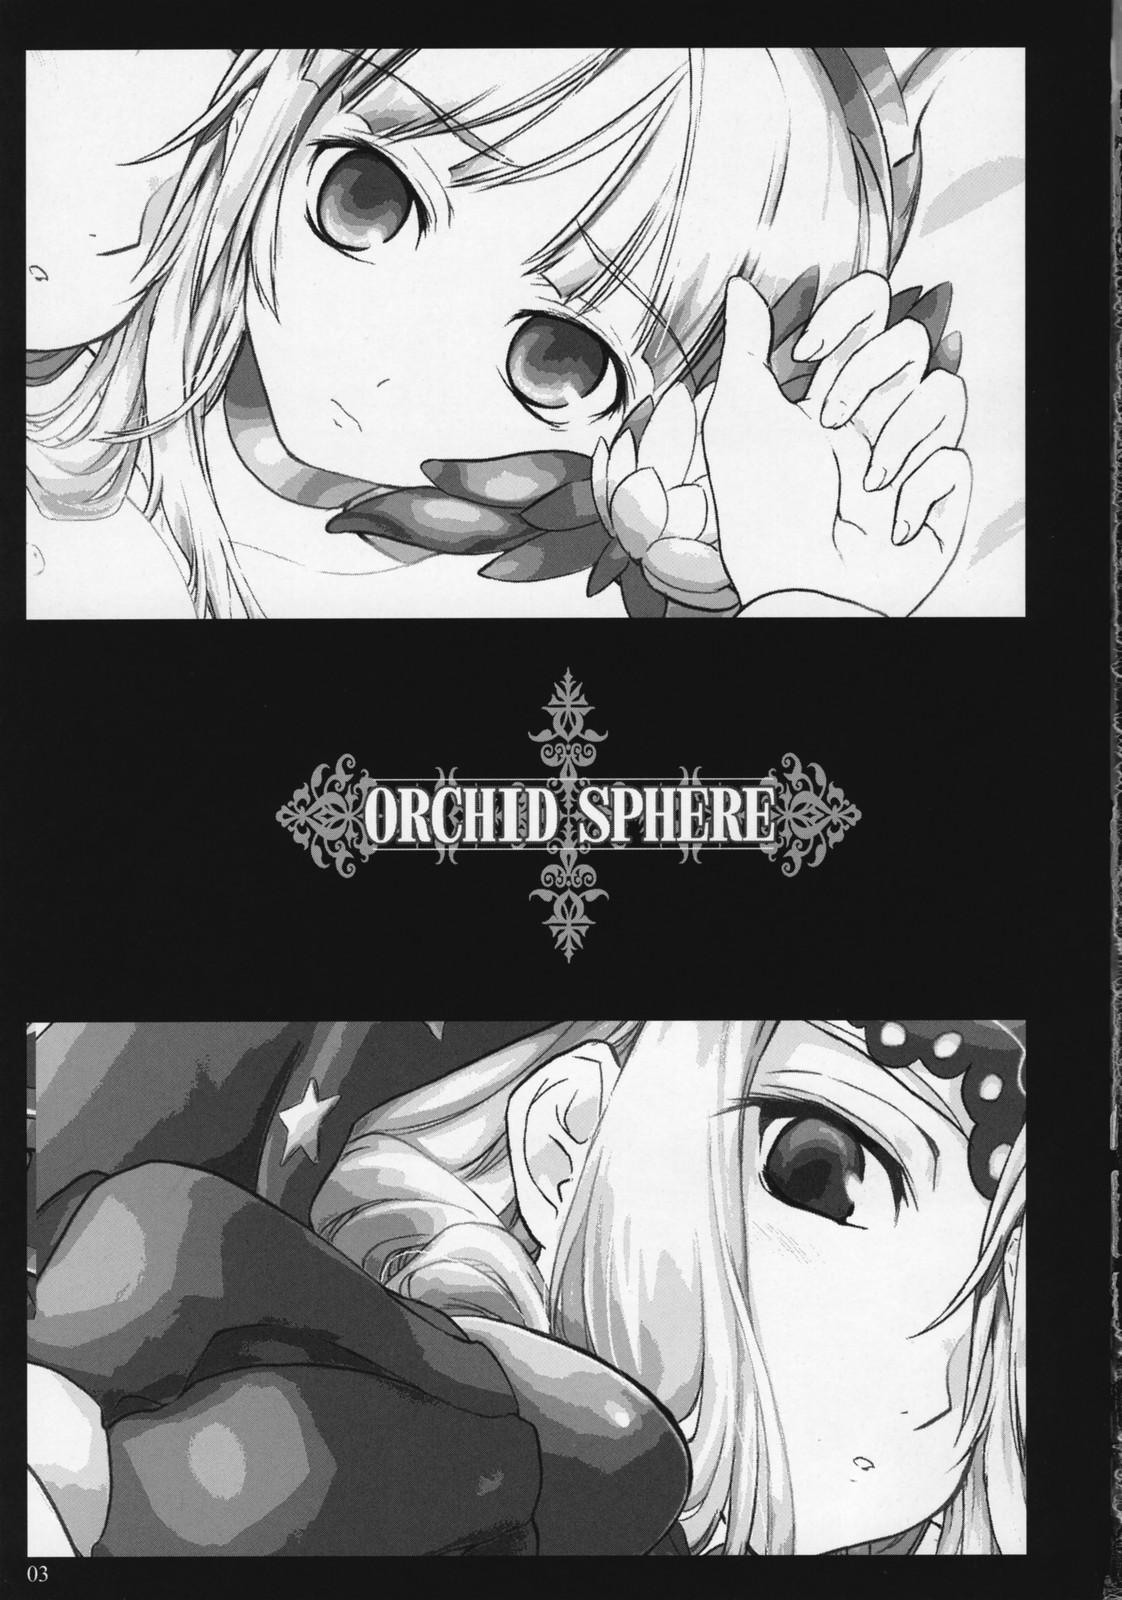 Free Amateur Orchid Sphere - Odin sphere Free Hardcore Porn - Page 2